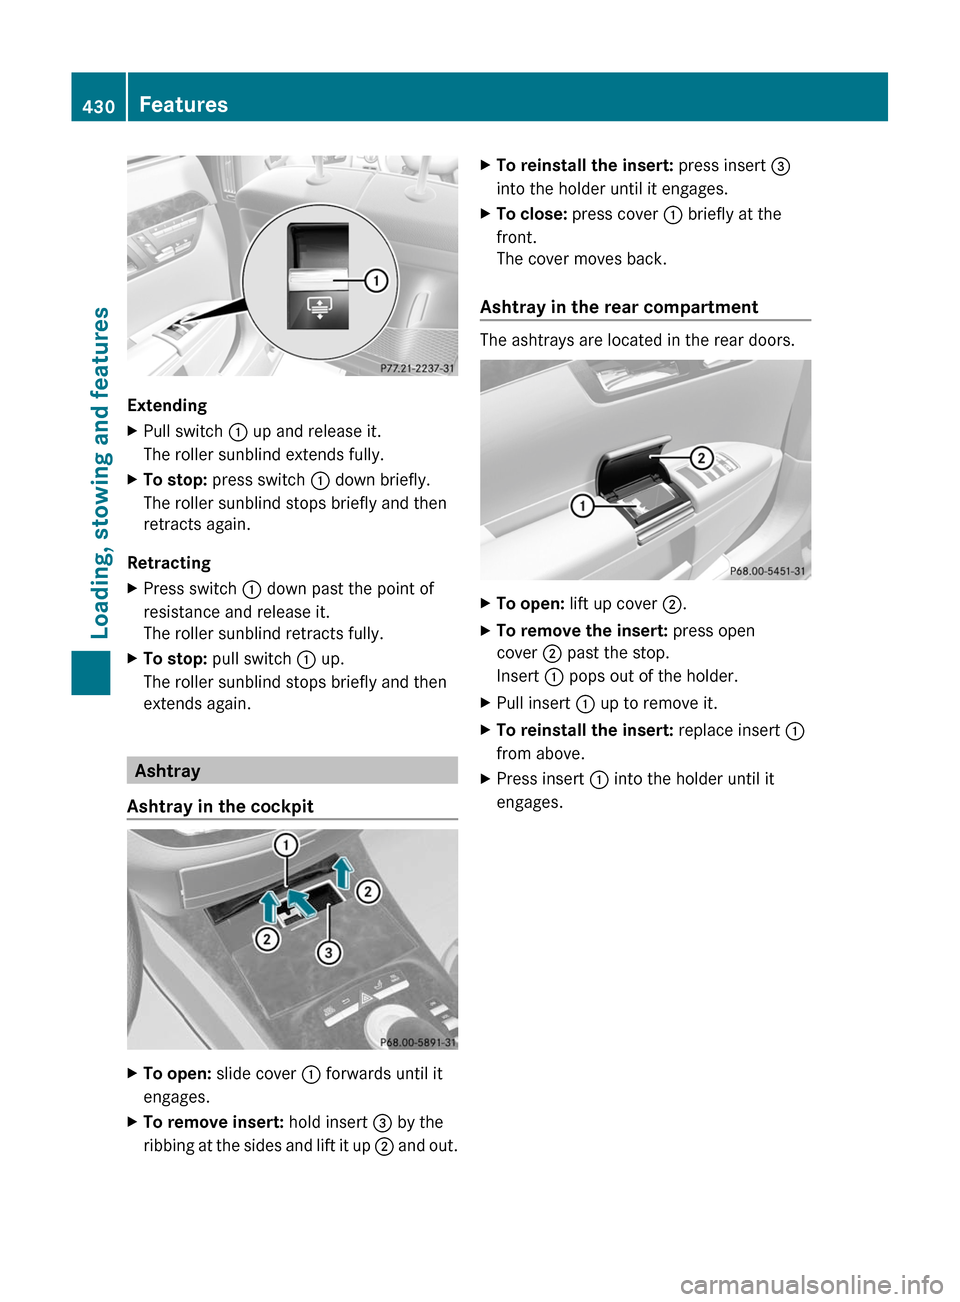 MERCEDES-BENZ S-Class 2011 W221 User Guide Extending
XPull switch : up and release it.
The roller sunblind extends fully.
XTo stop: press switch : down briefly.
The roller sunblind stops briefly and then
retracts again.
Retracting
XPress switc